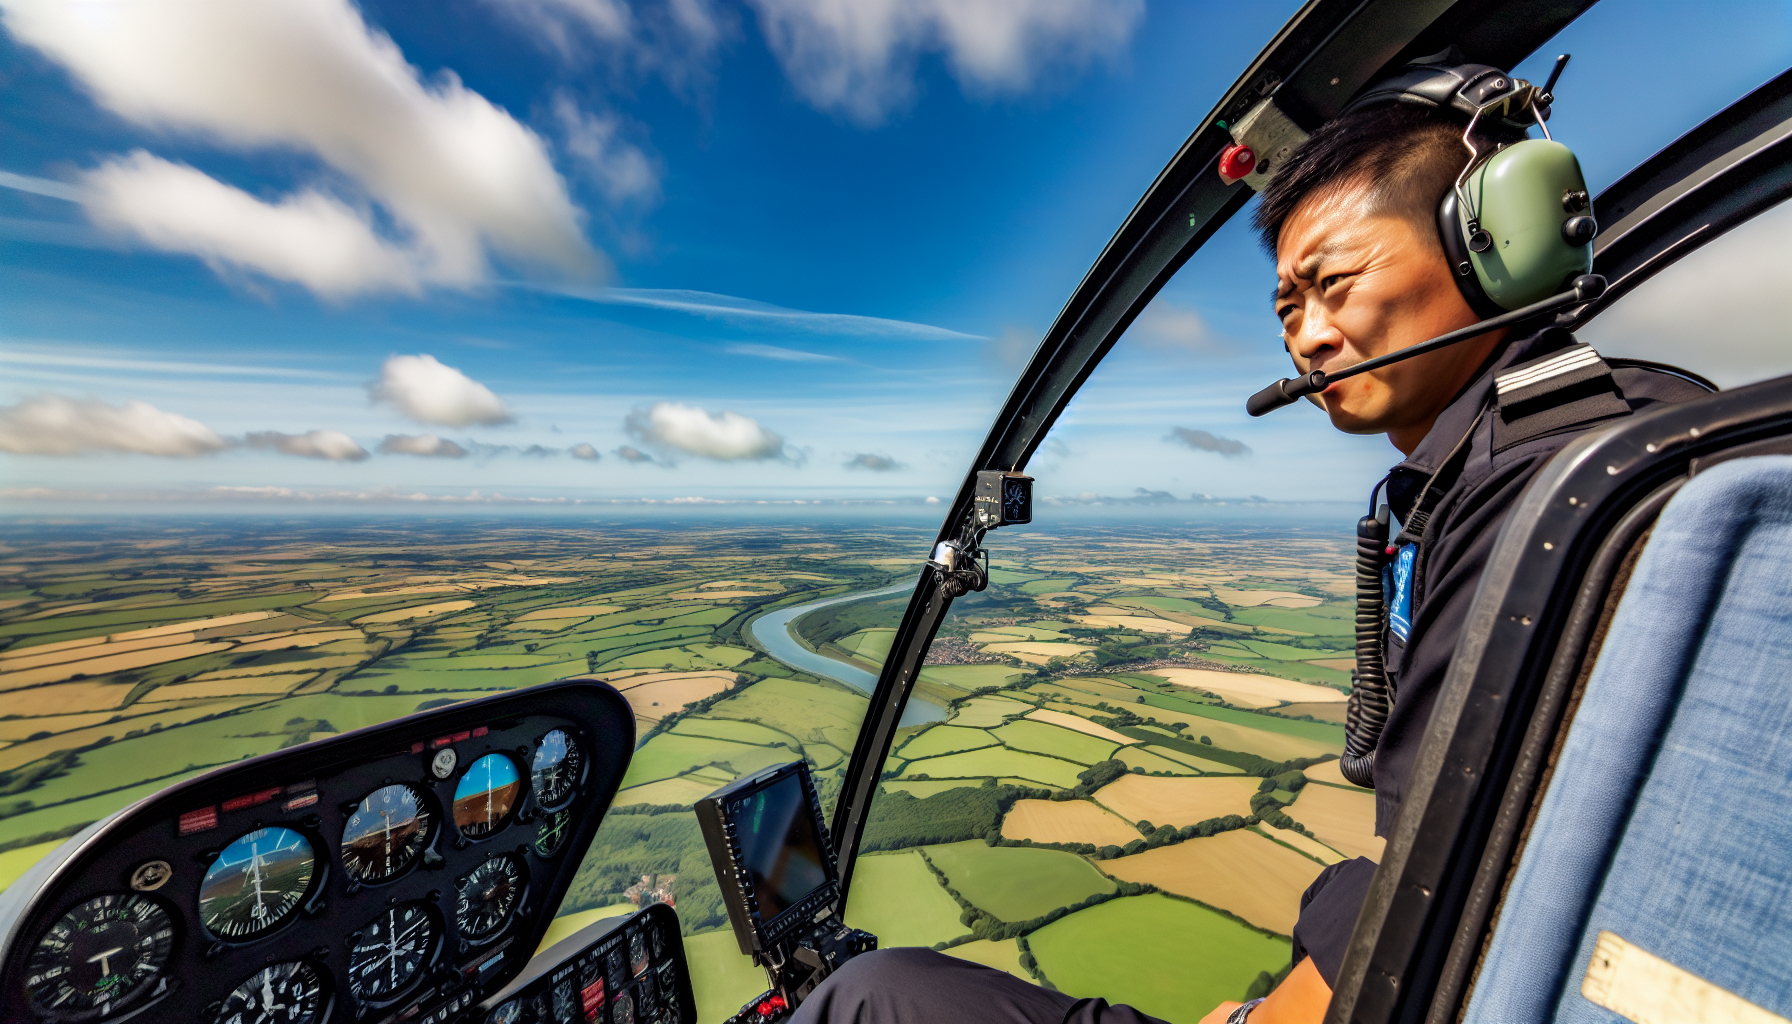 Helicopter pilot conducting solo flight over scenic landscape